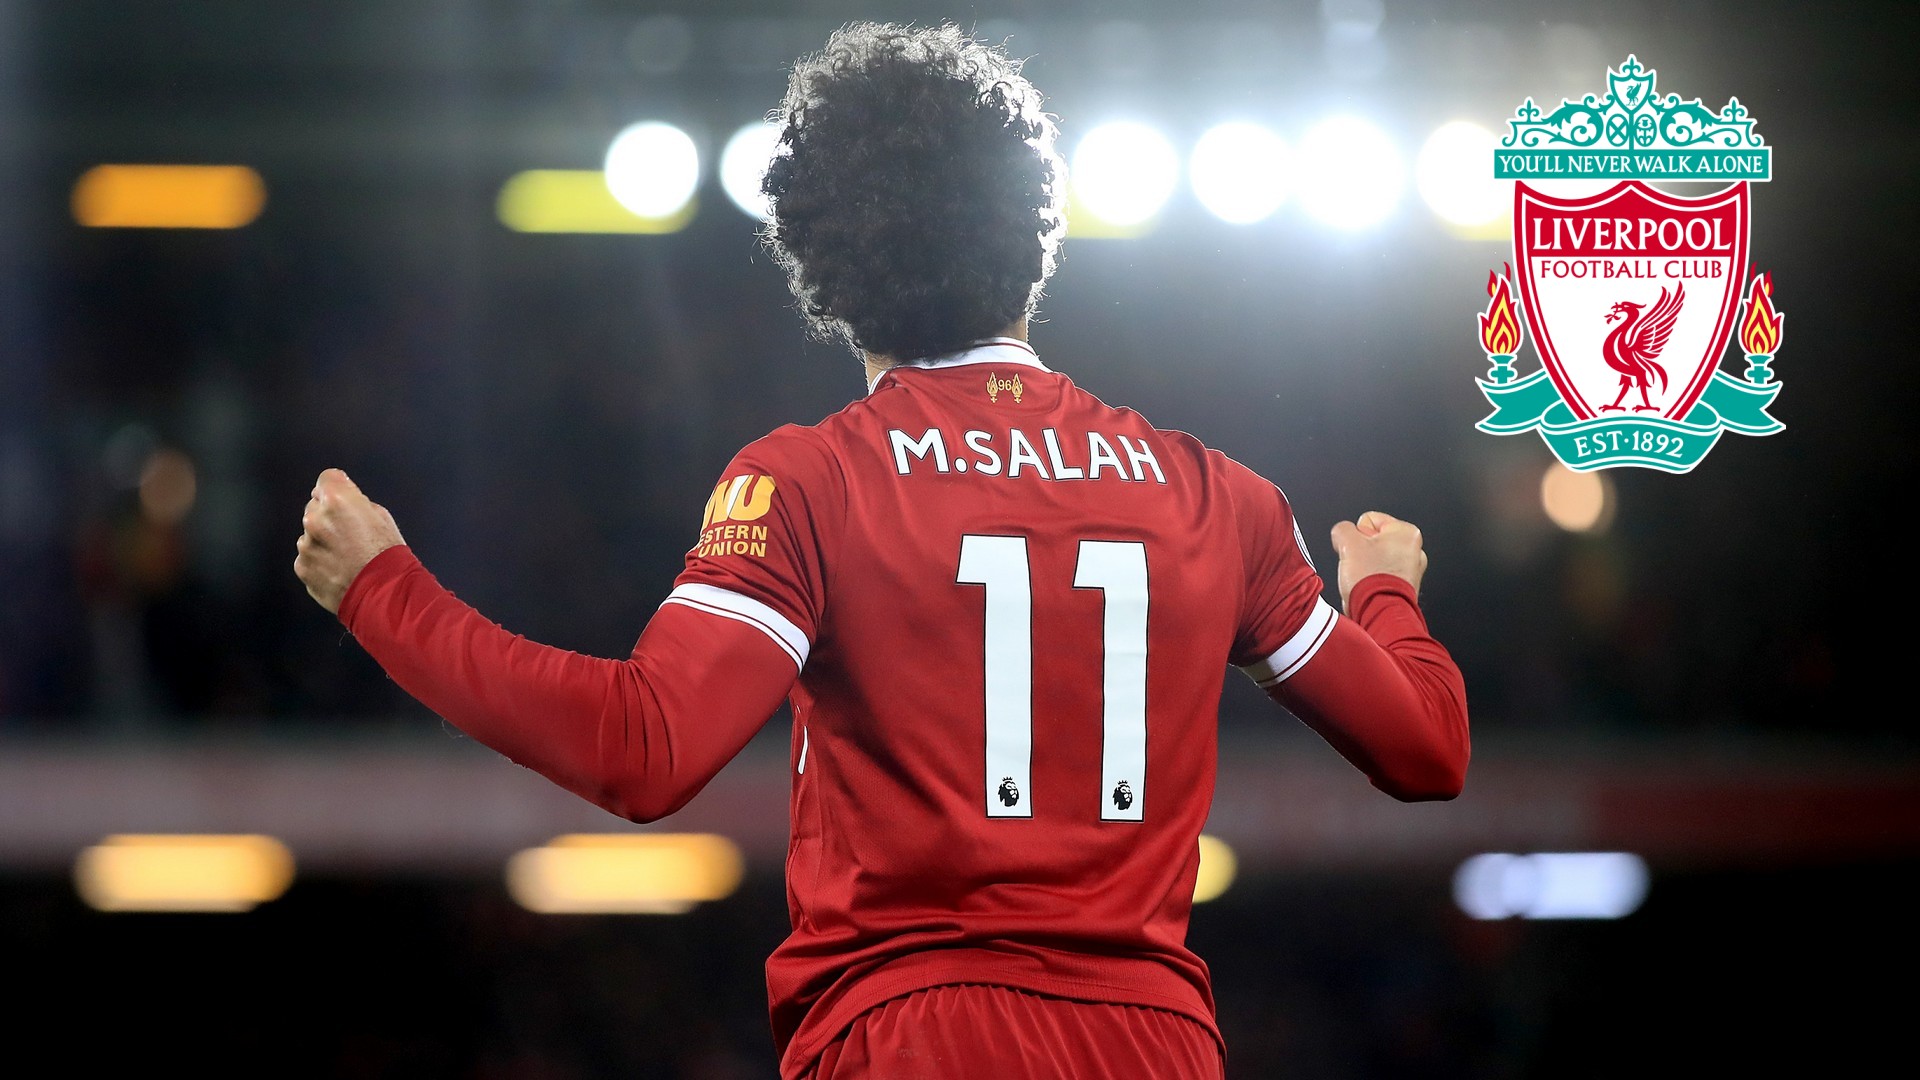 HD Mohamed Salah Backgrounds with image resolution 1920x1080 pixel. You can use this wallpaper as background for your desktop Computer Screensavers, Android or iPhone smartphones